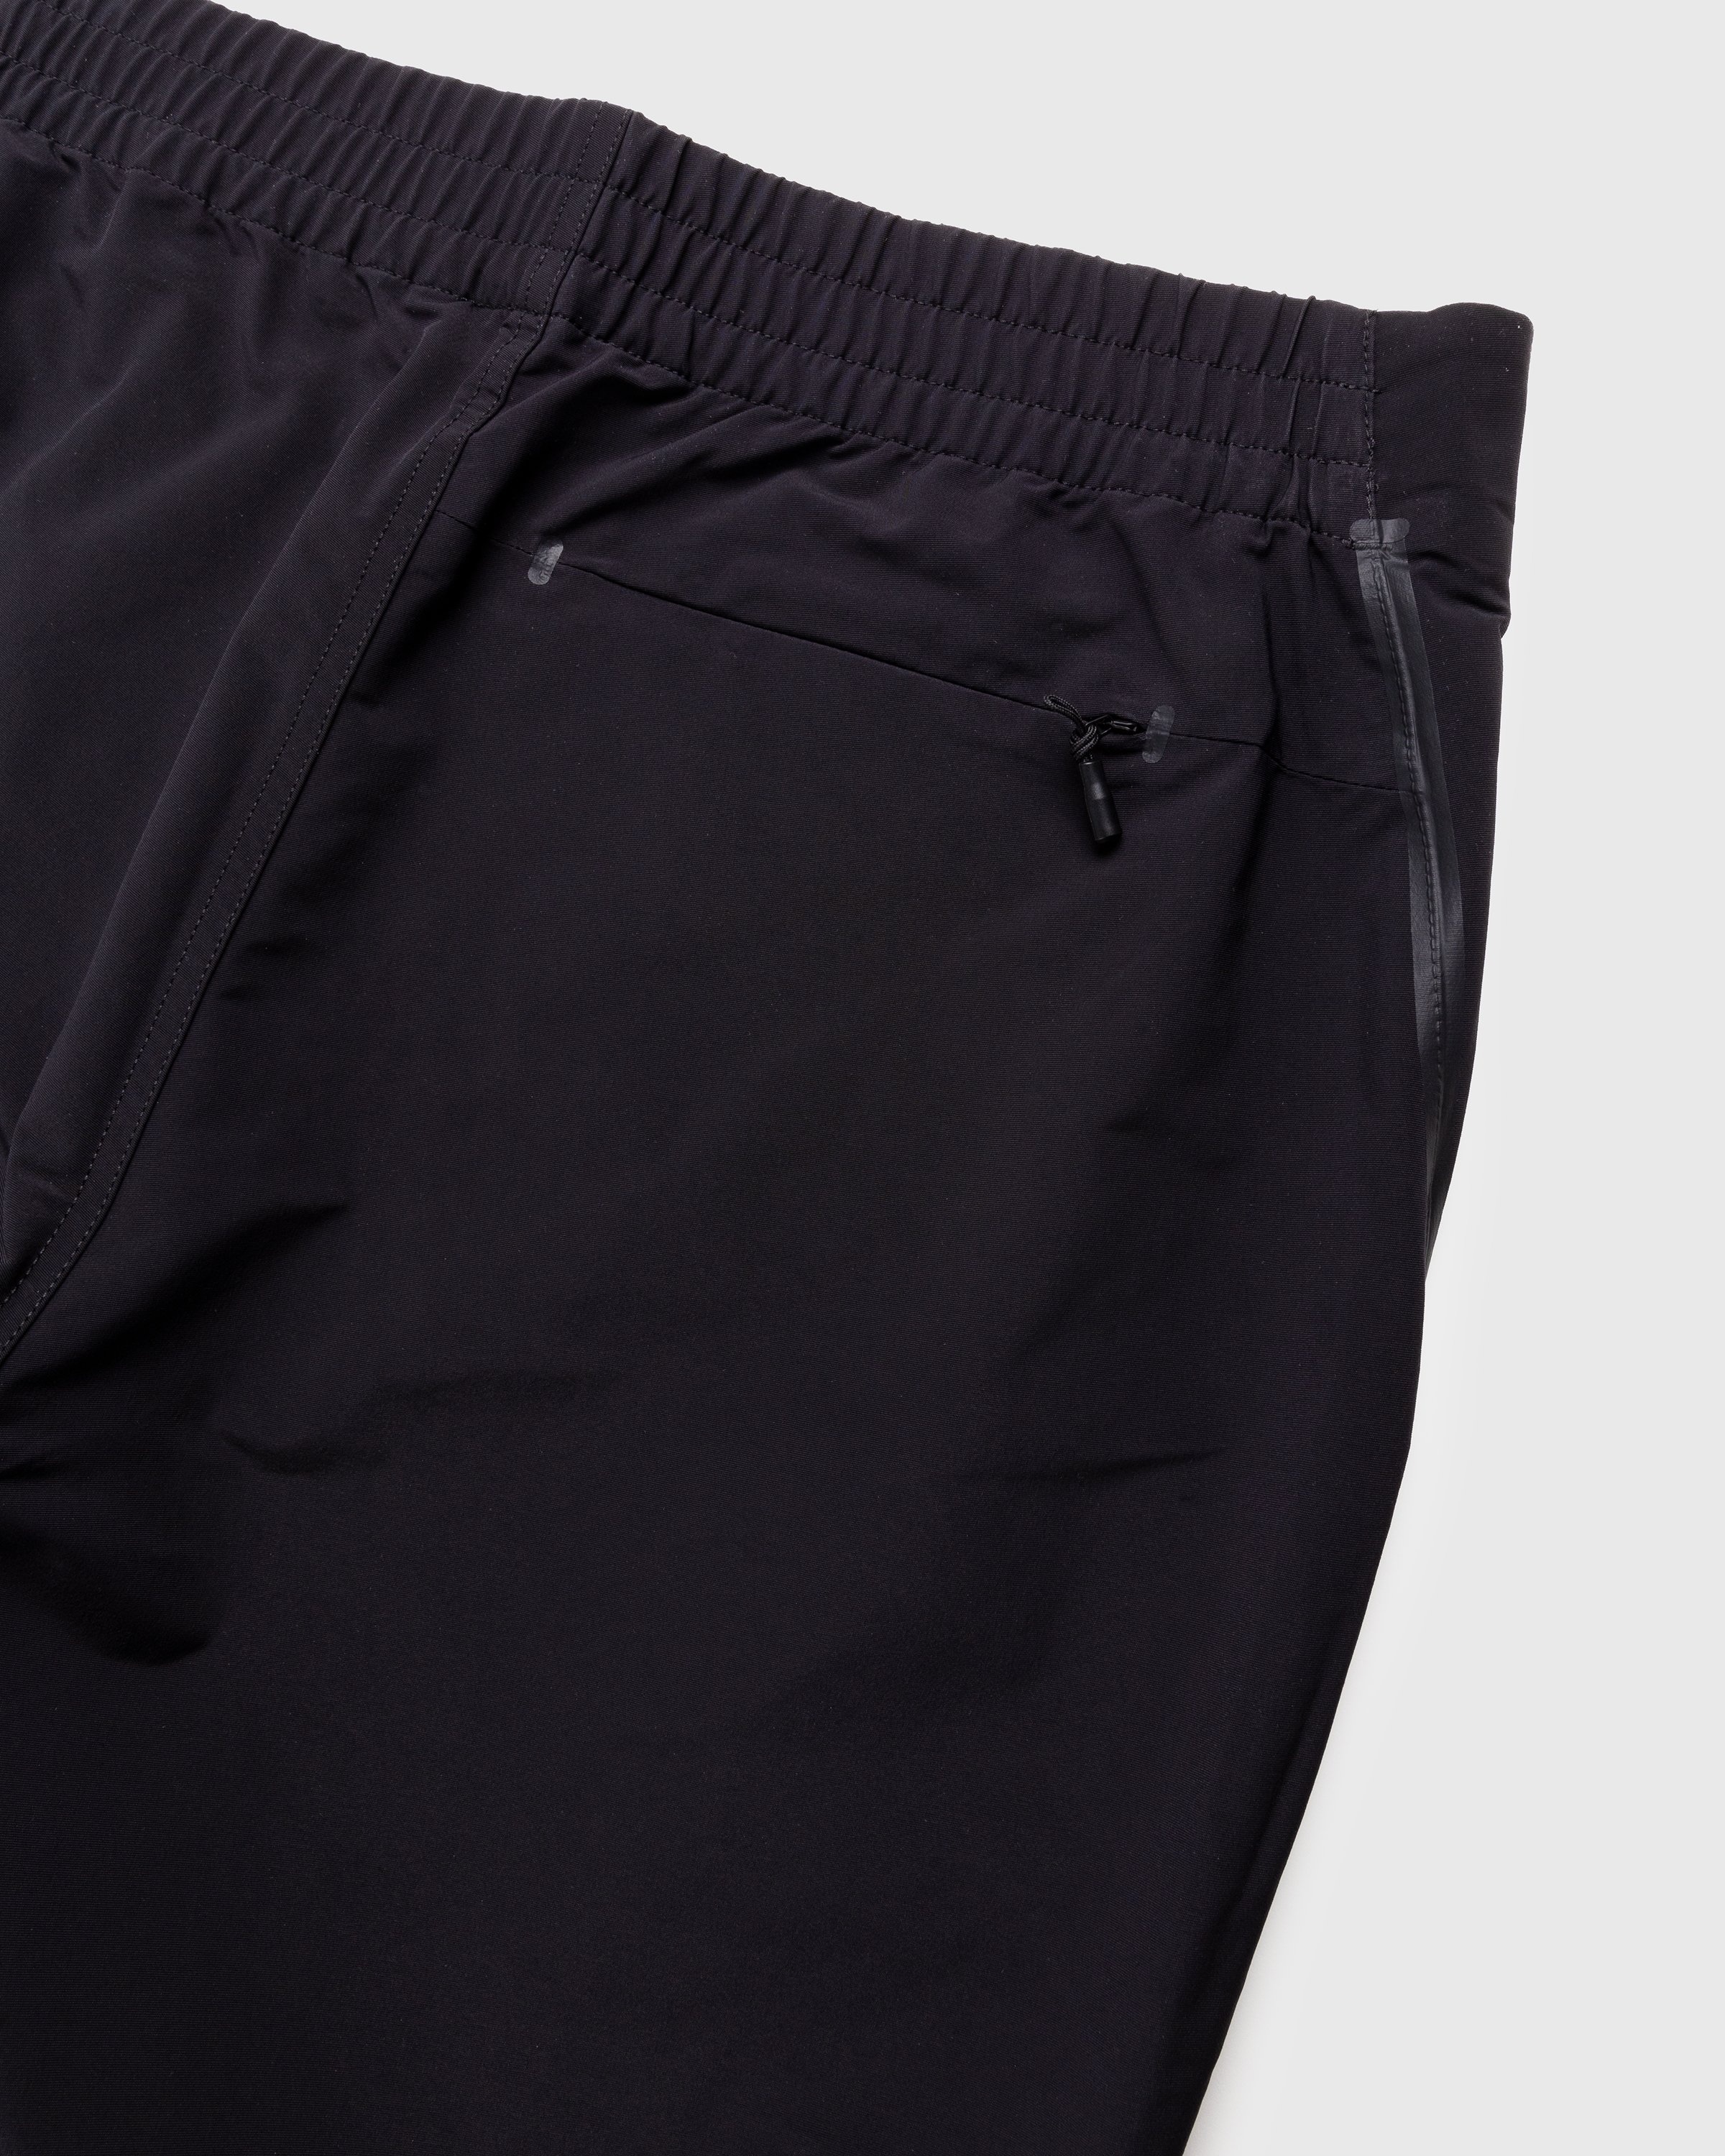 The North Face – RMST Mountain Pant Black - Track Pants - Black - Image 6